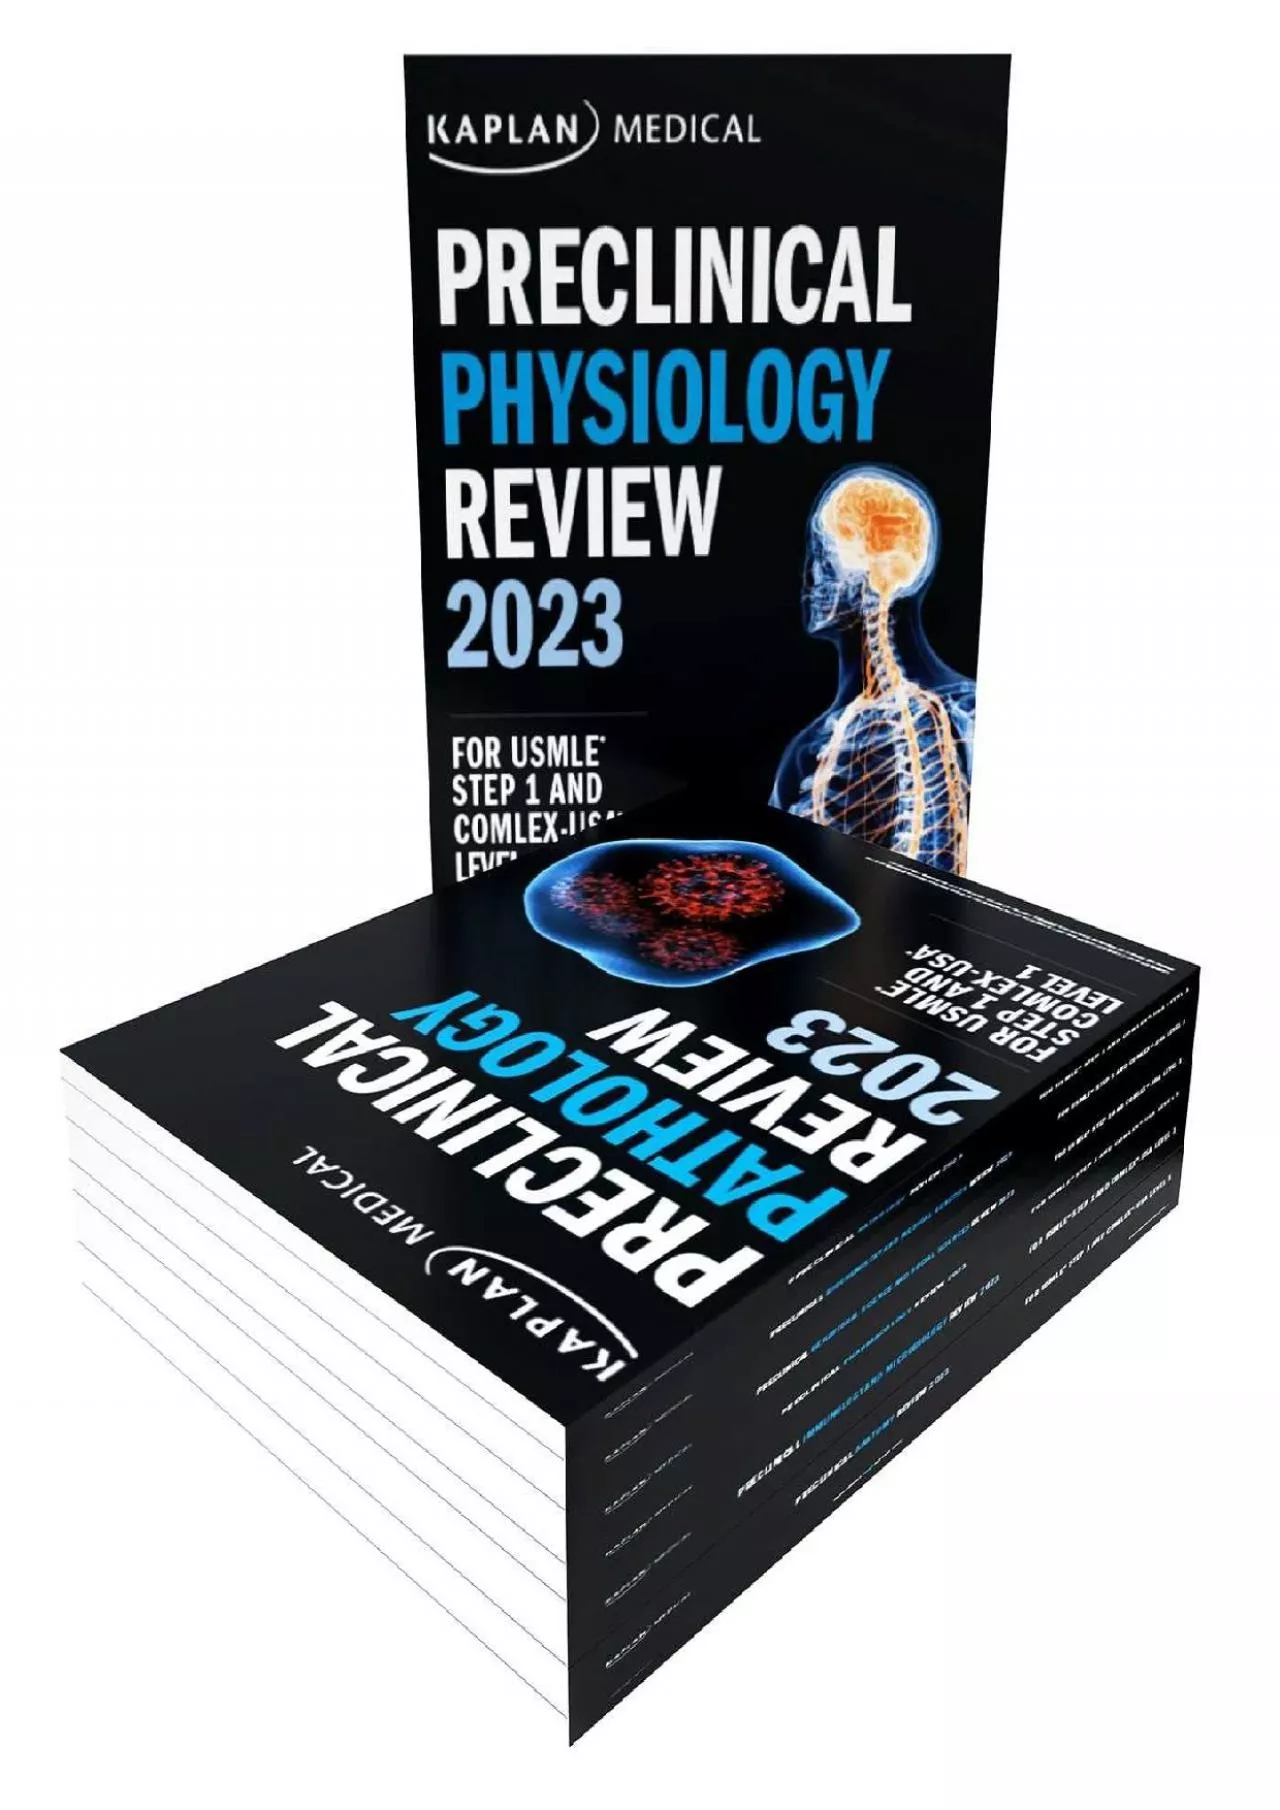 [READ] Preclinical Medicine Complete 7-Book Subject Review 2023: For USMLE Step 1 and